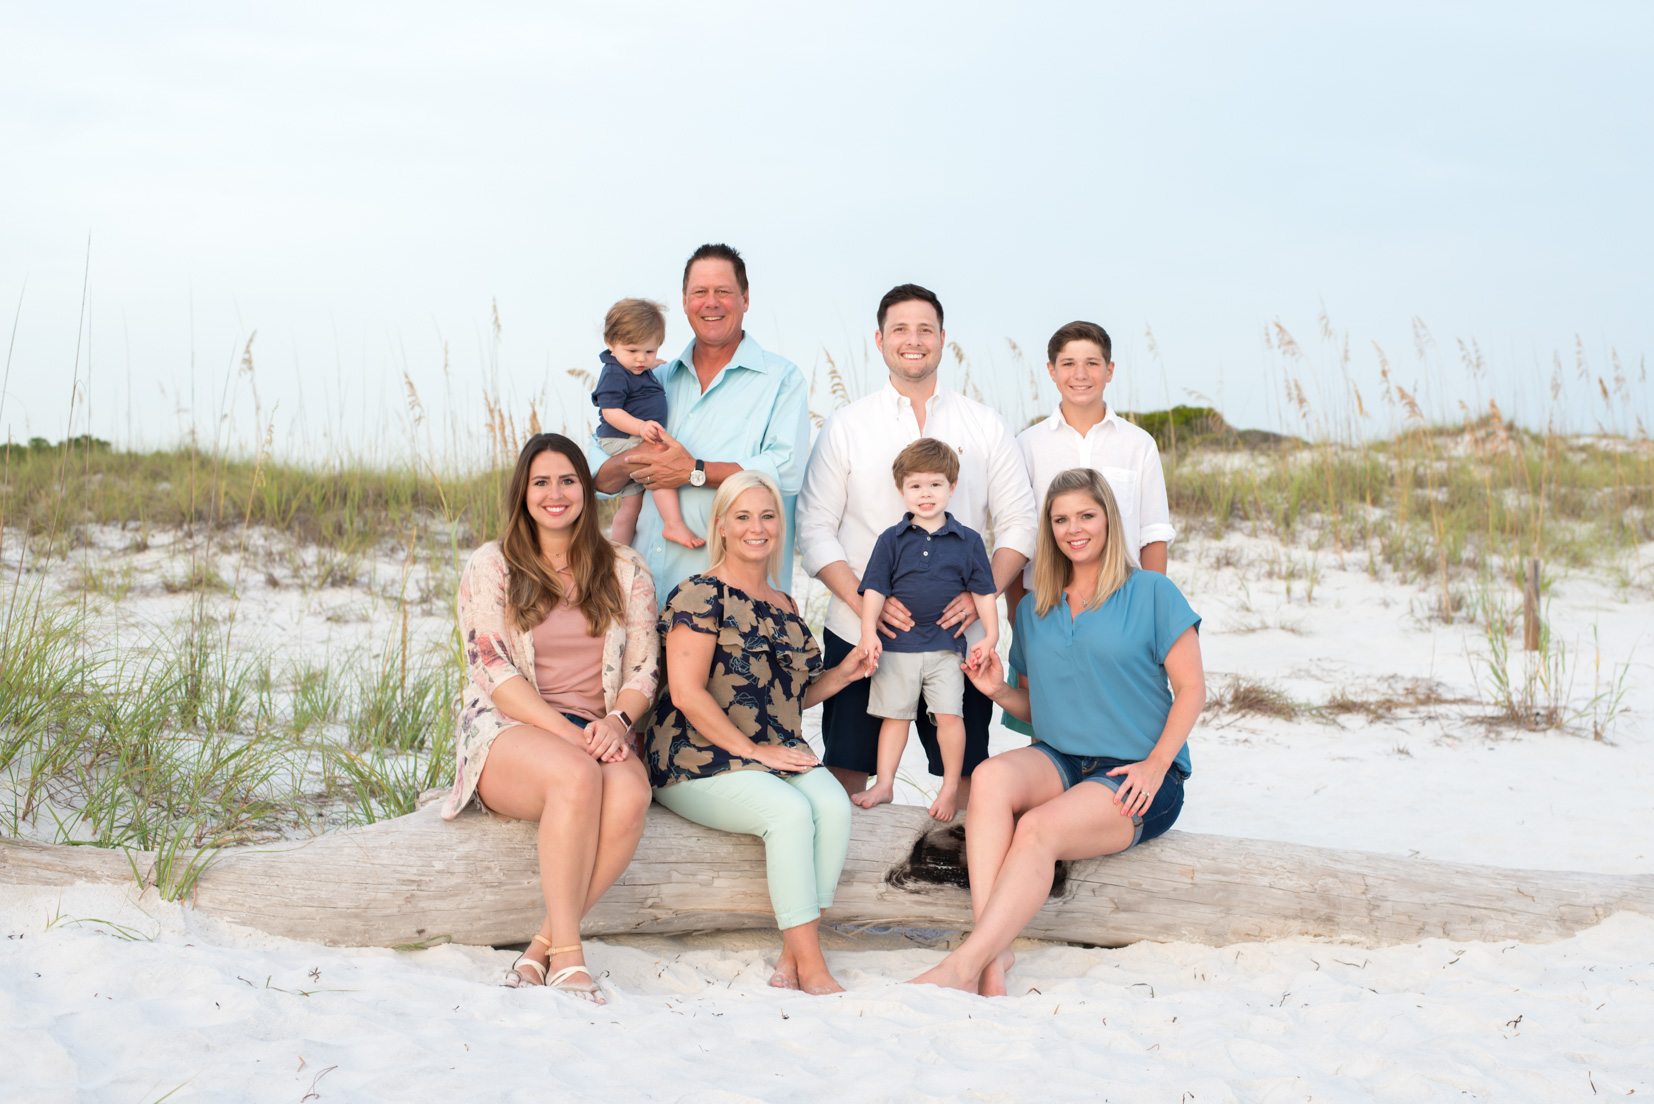 DSC_3358.jpg - Family portrait photography at sunset in Panama City Beach, Fl. by Holly Naughton Photography